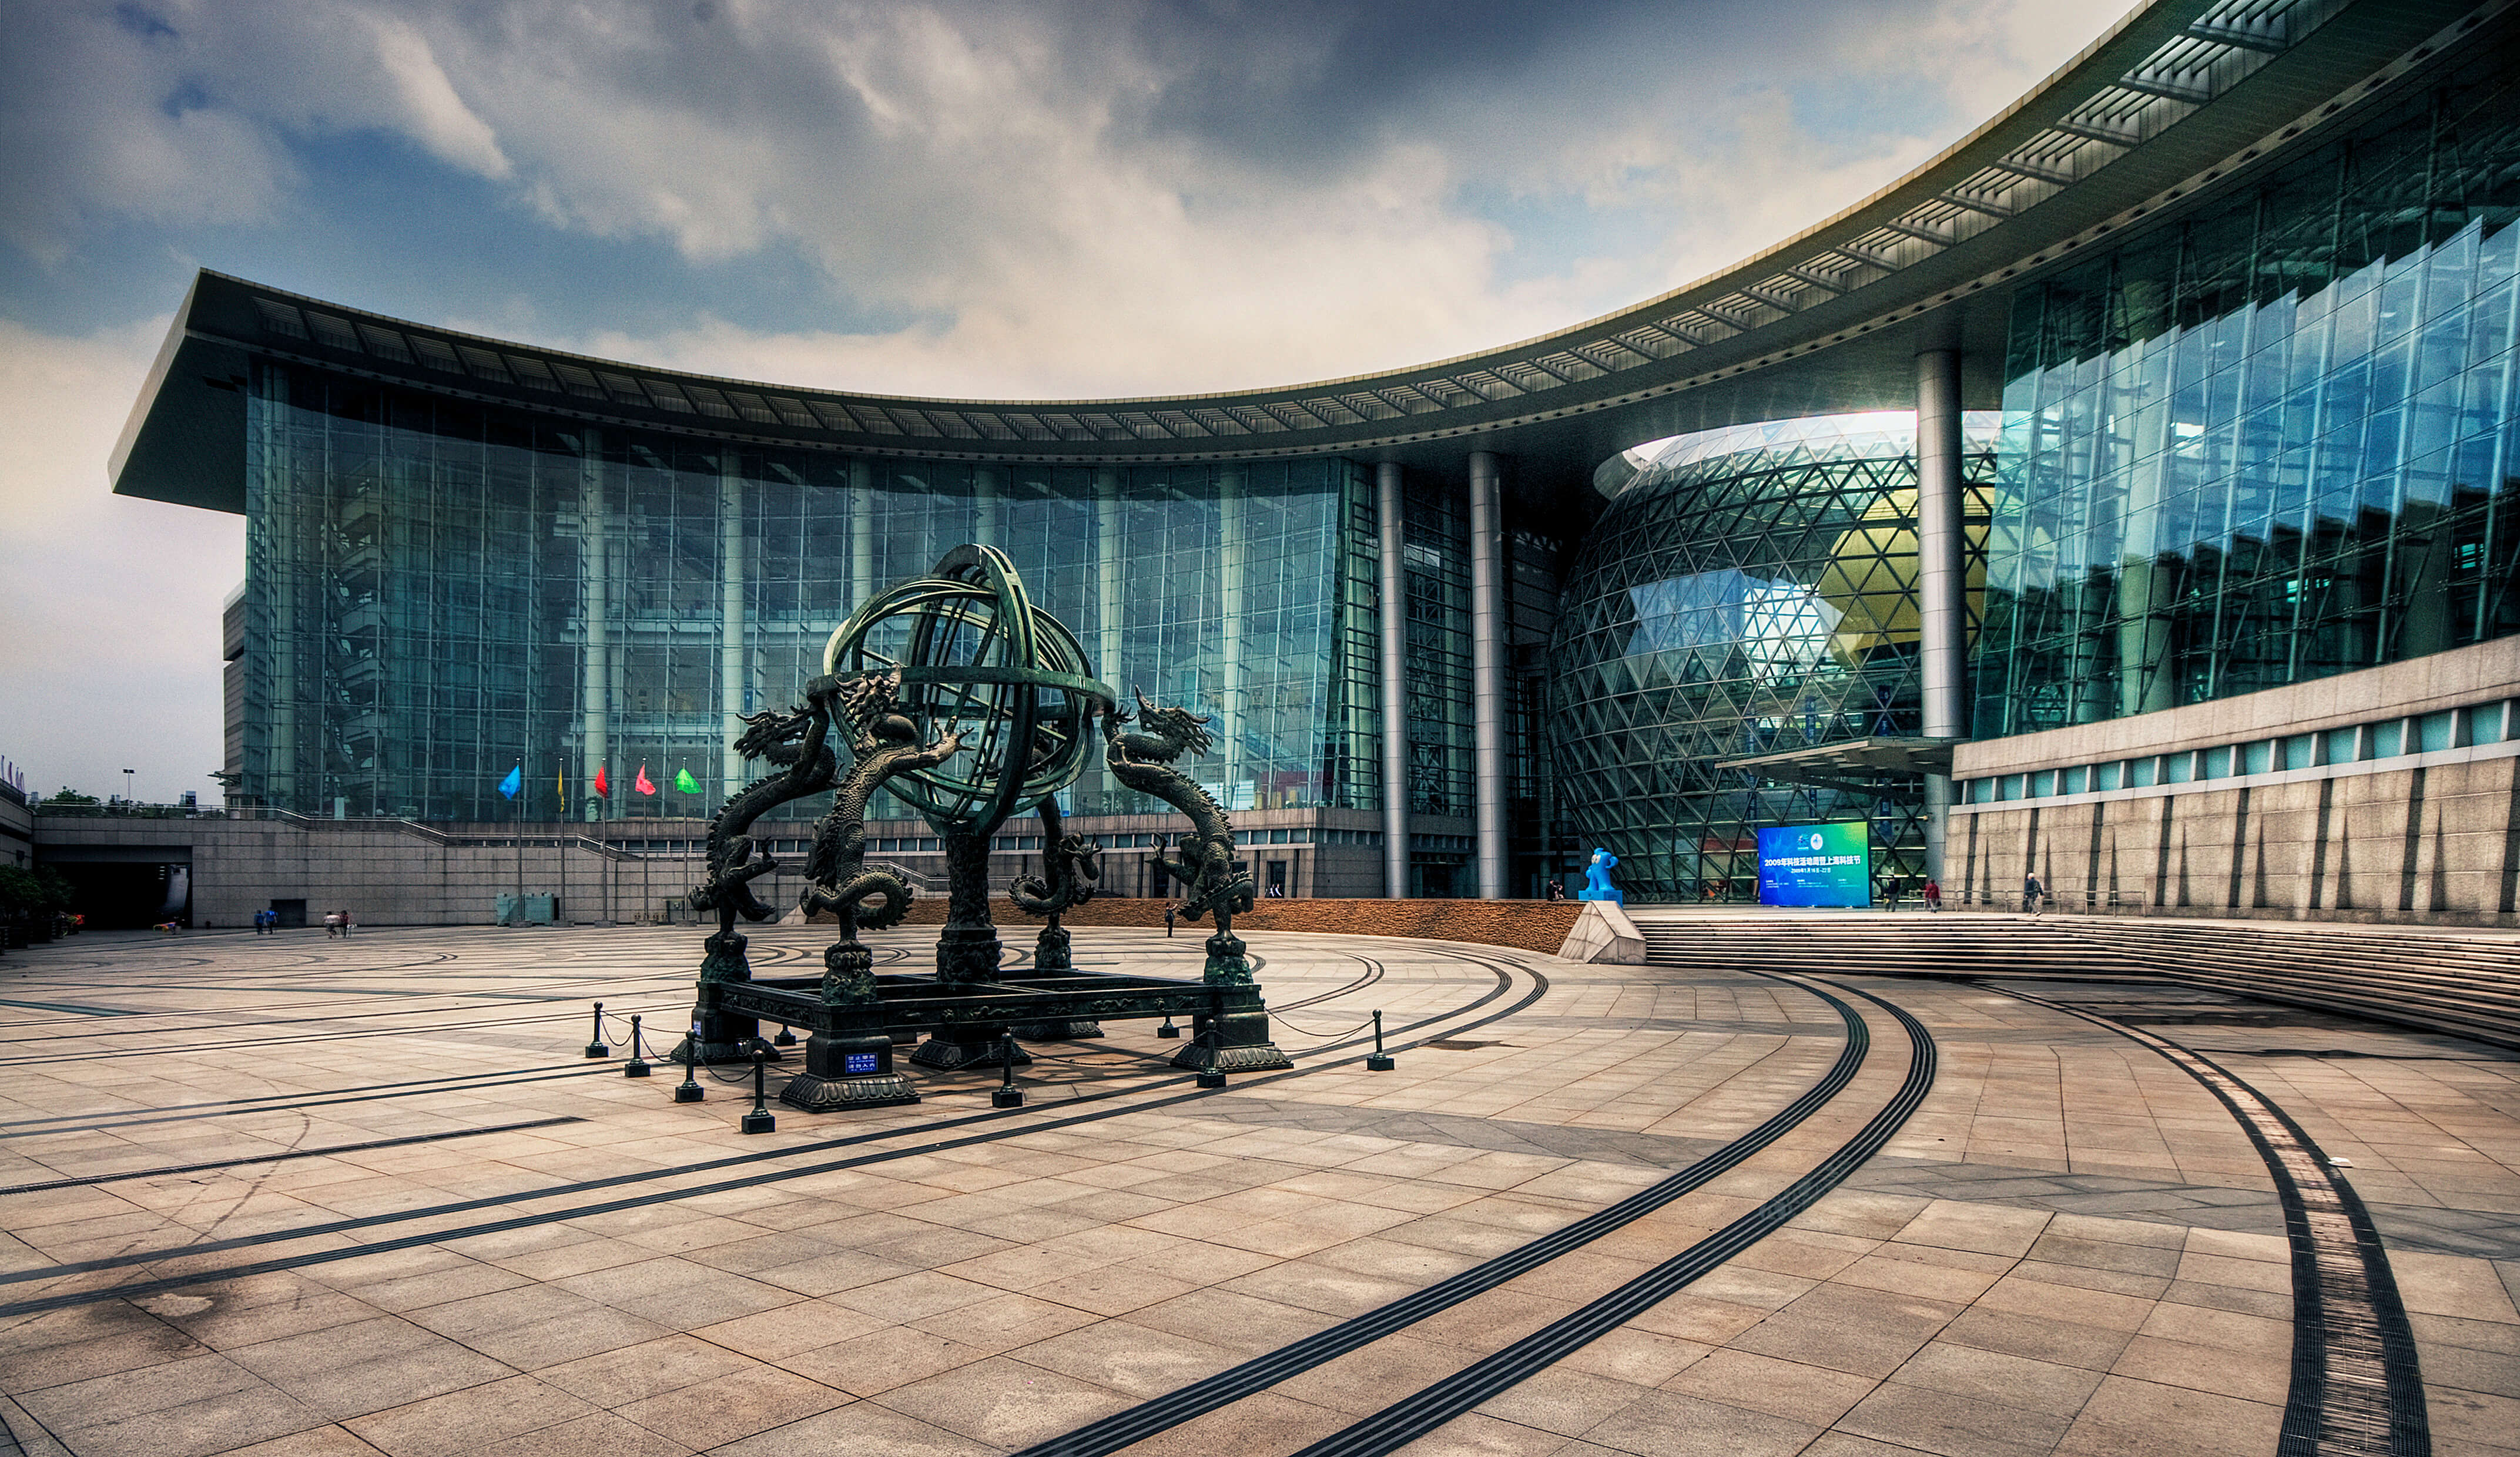 Shanghai Science and Technology Museum © Wolfgang Staudt / Flickr.